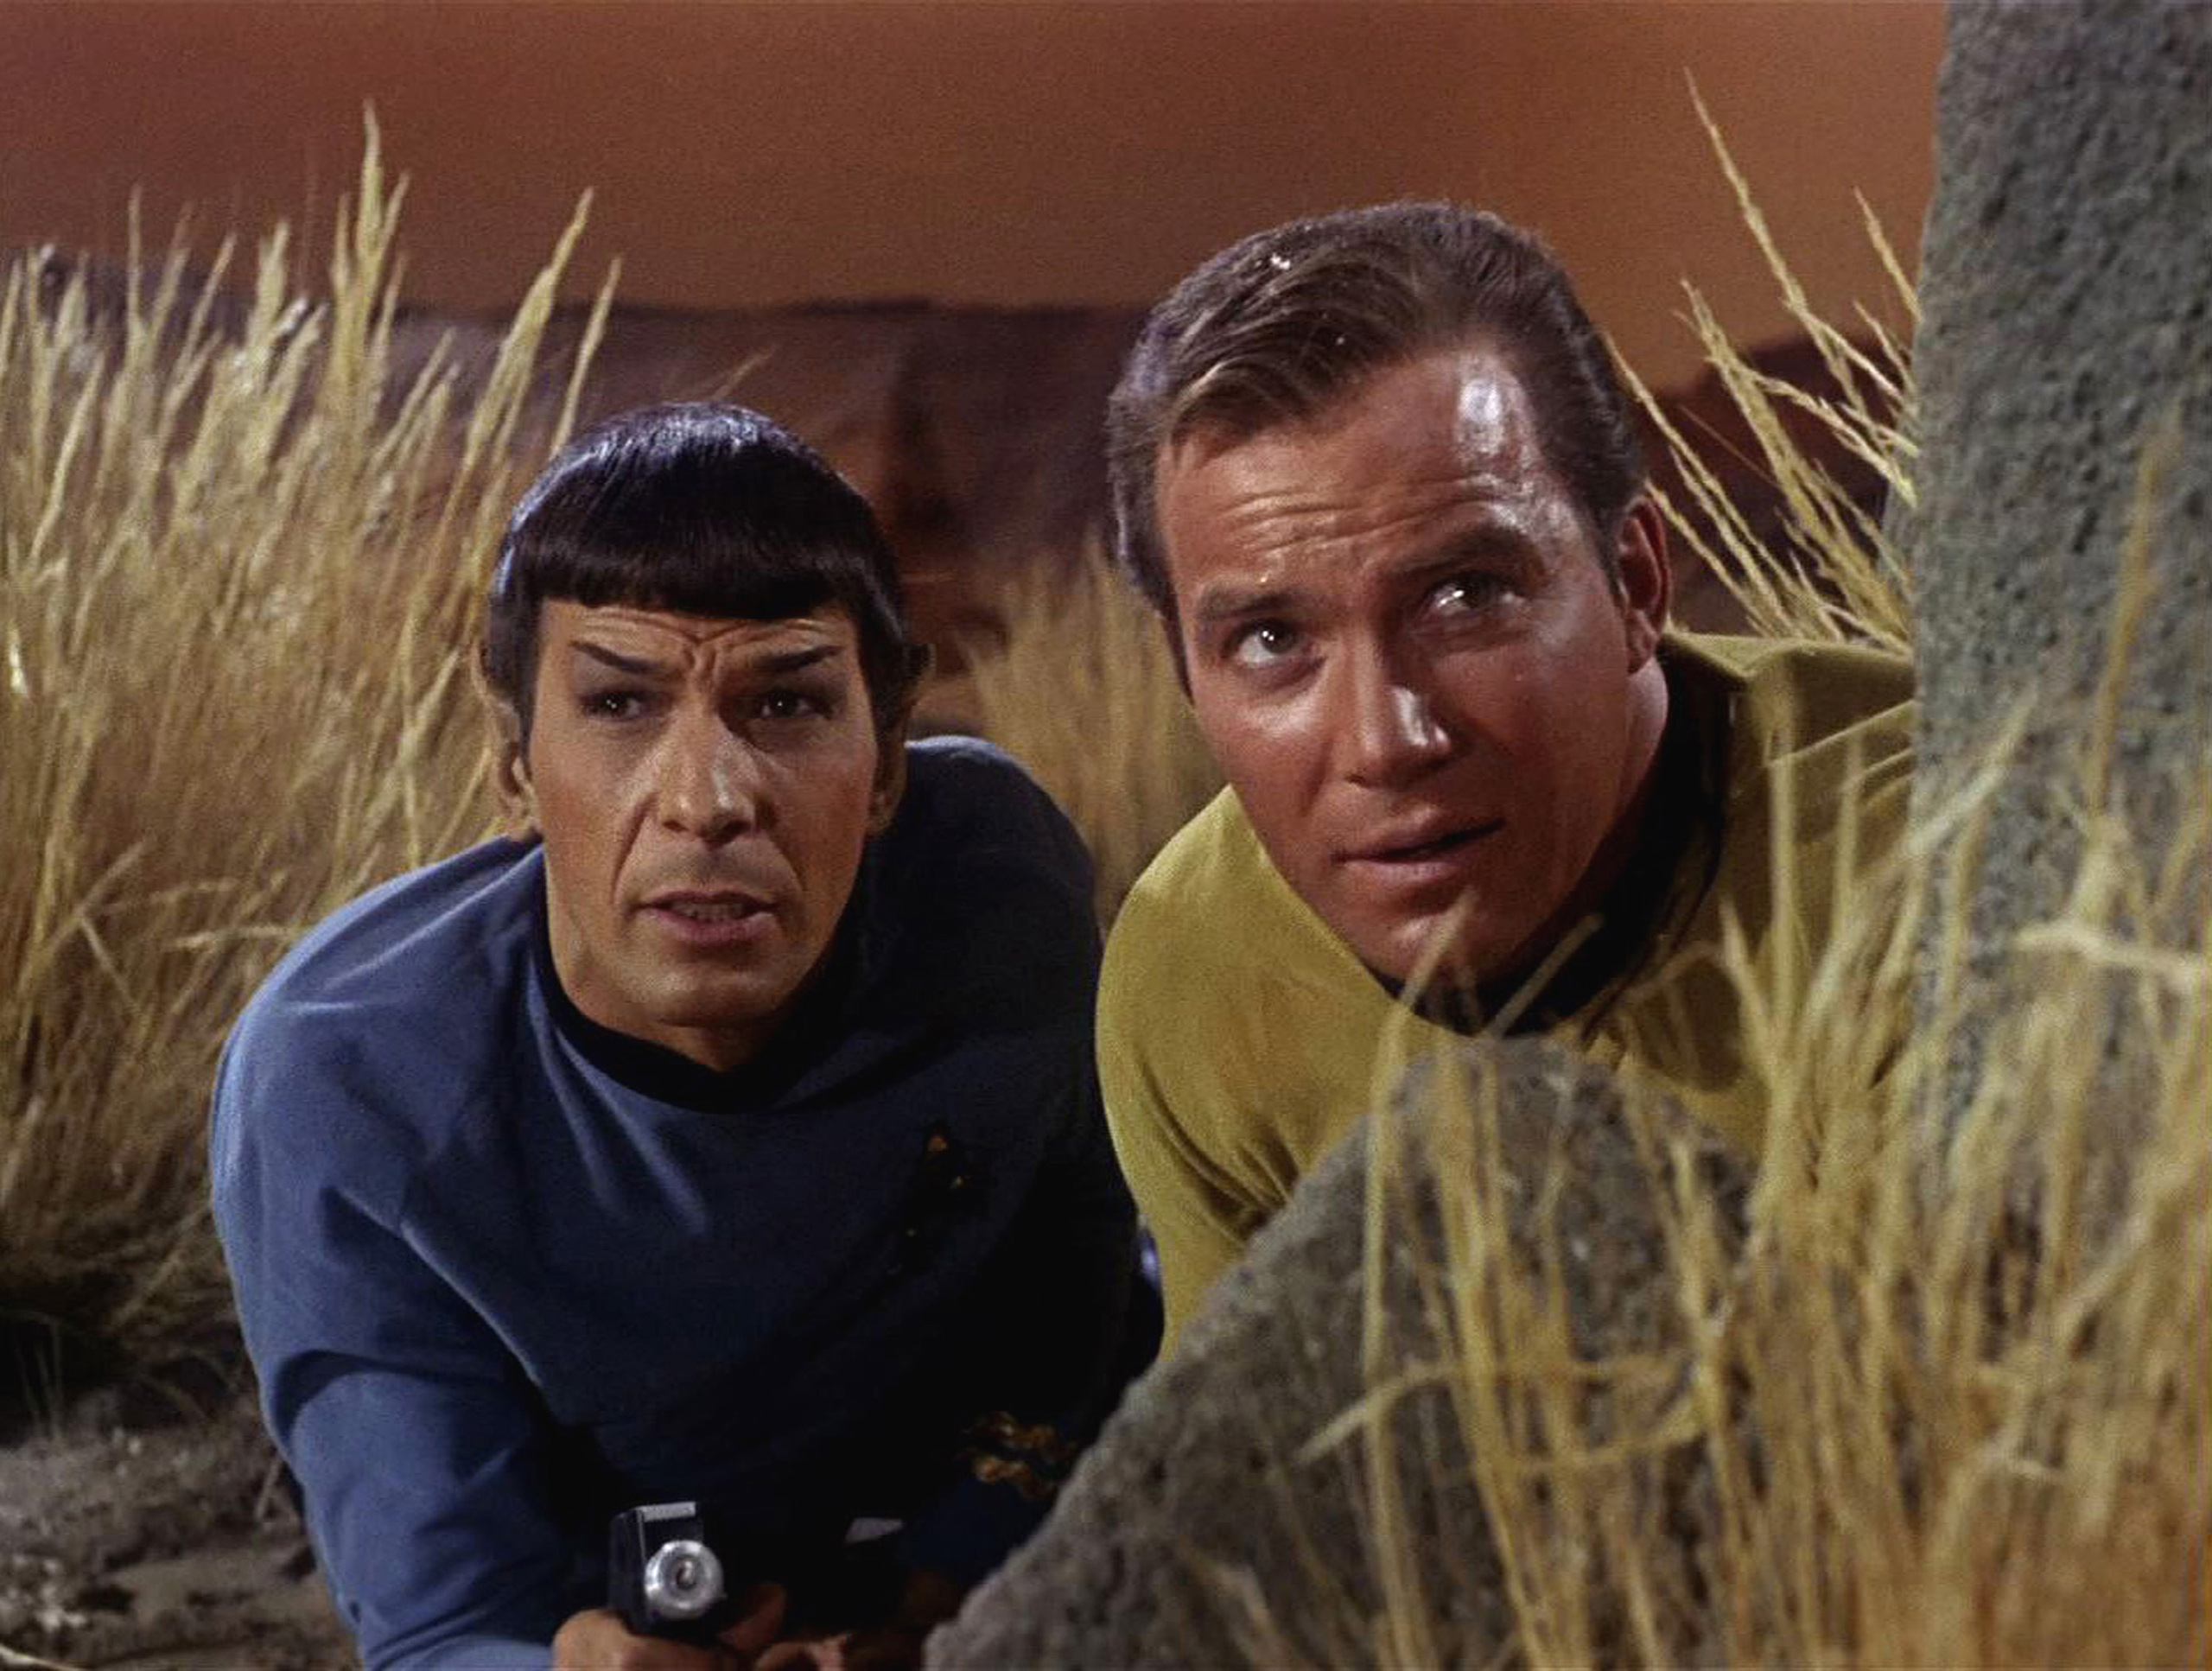 Leonard Nimoy as Mr. Spock and William Shatner as Captain James T. Kirk in the premiere episode of Star Trek, Sept. 8, 1966. (CBS/Getty Images)